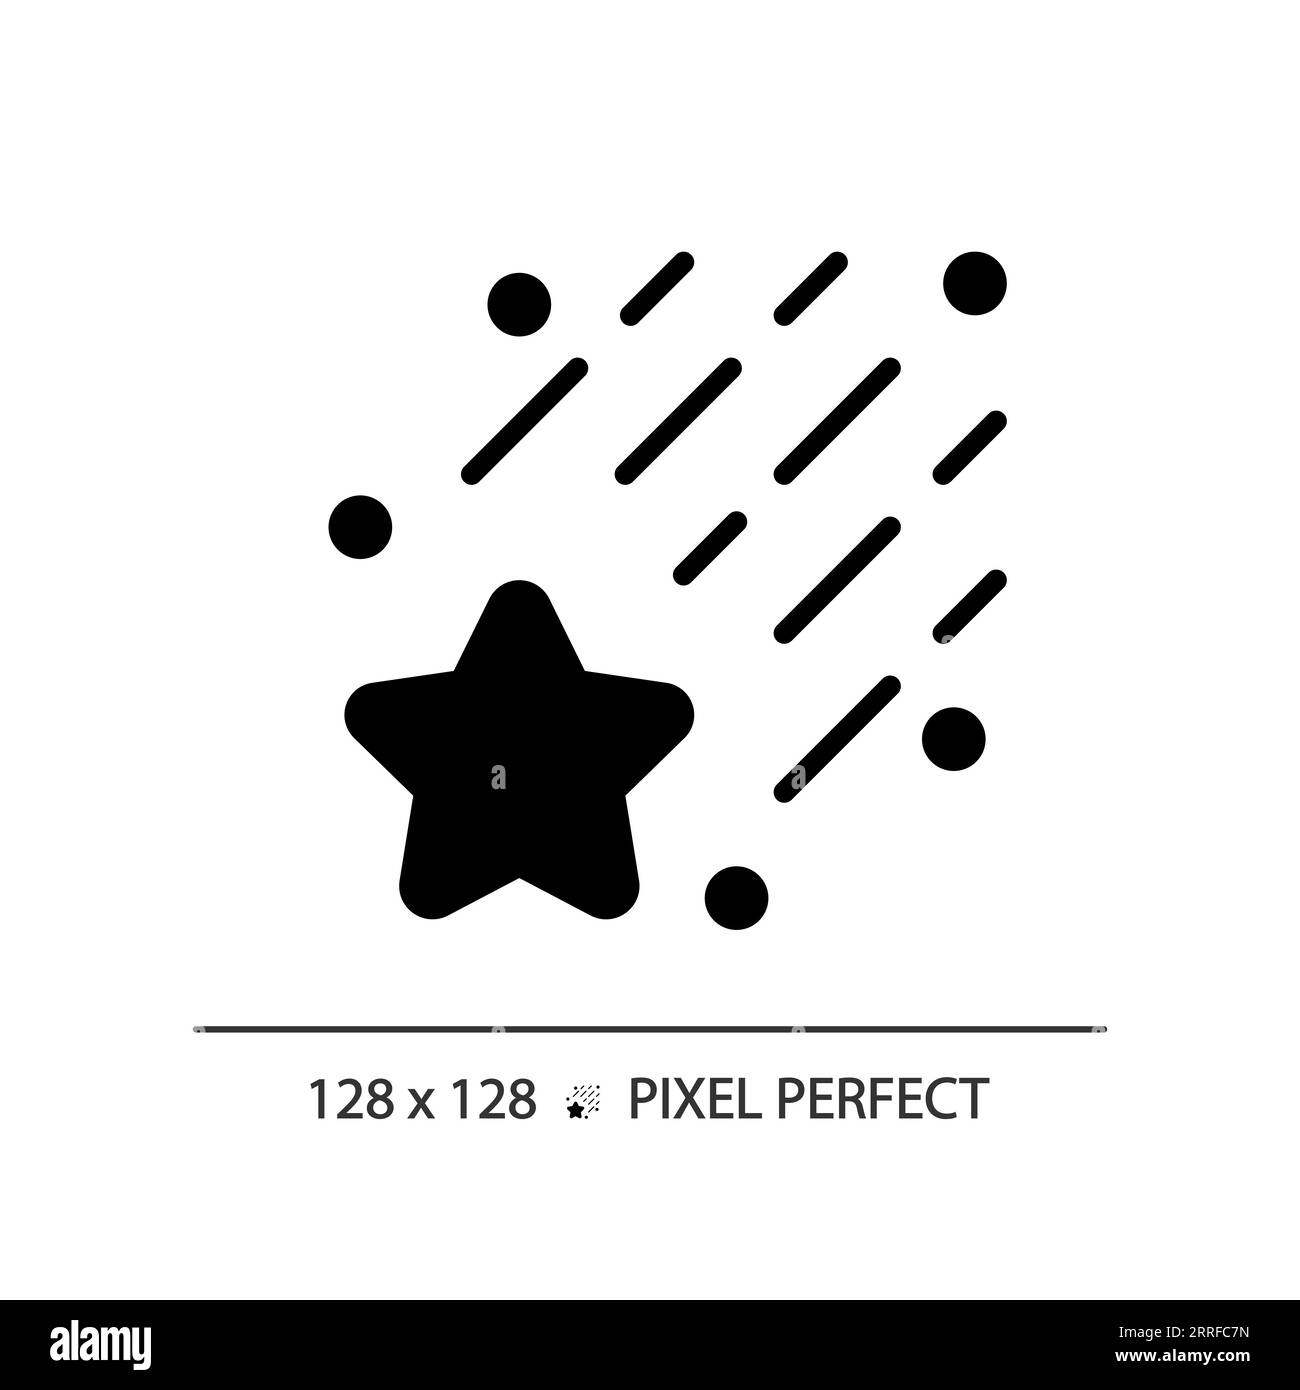 Falling star pixel perfect black glyph icon Stock Vector